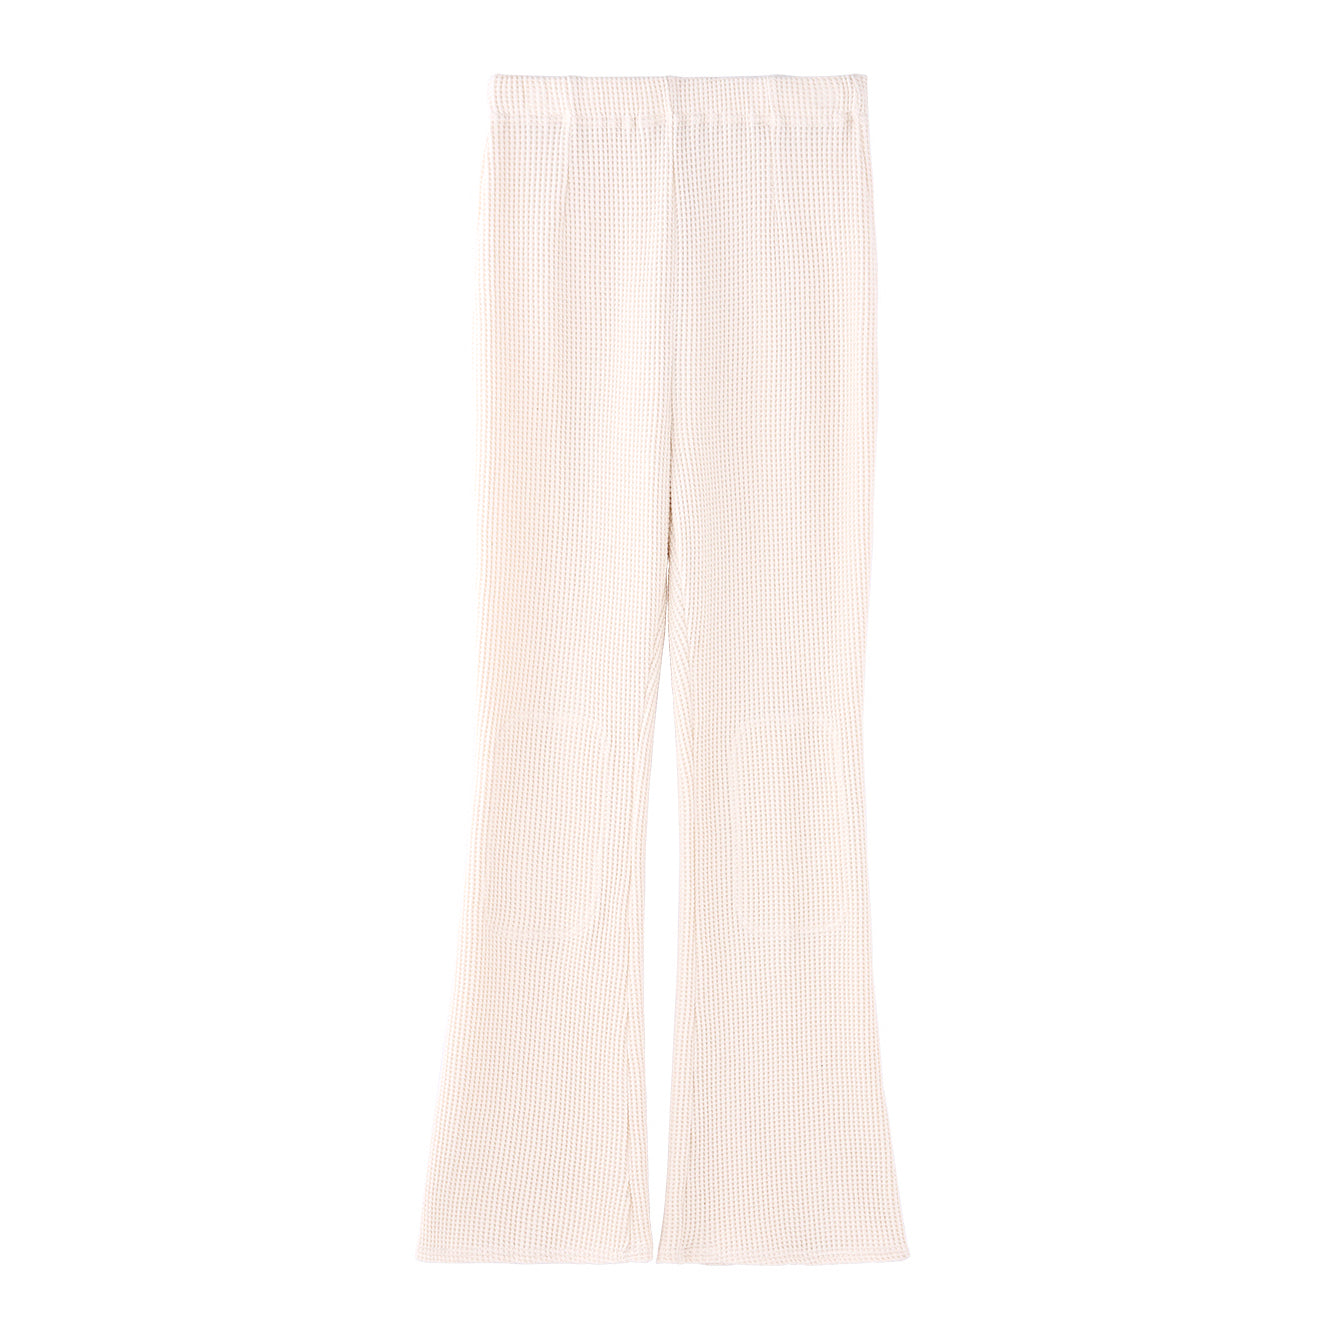 No:T2332-09005_OFF | Name:waffle pants | Color:Off【TWOSOME_トゥーサム】【入荷予定アイテム・入荷連絡可能】